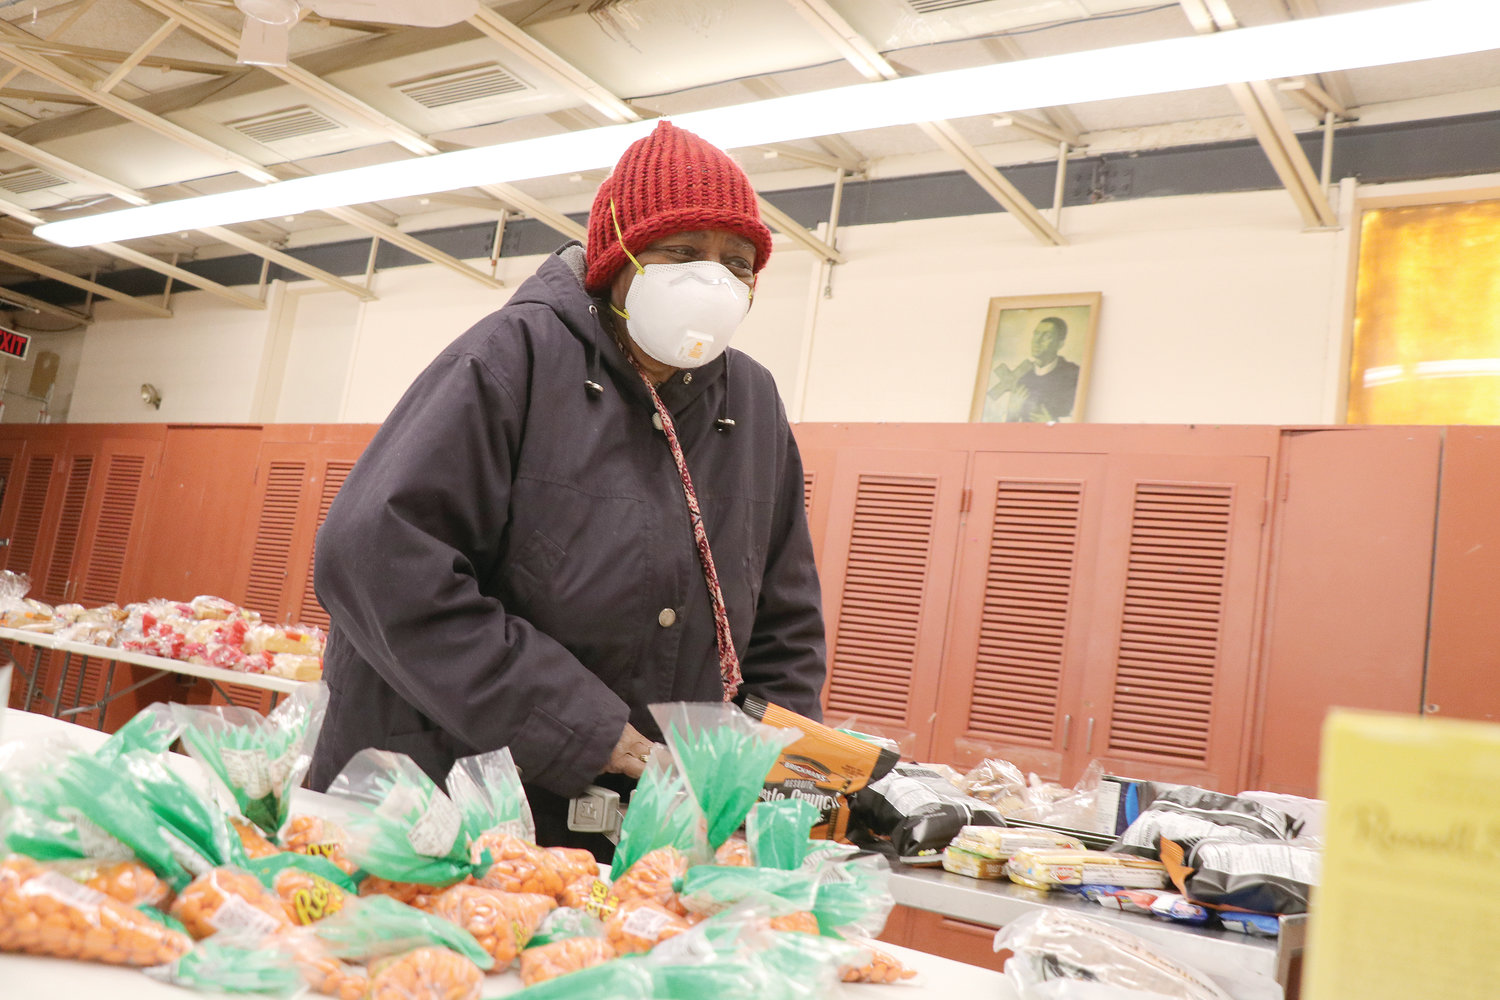 Gladys Willis, 88, shops among the donated food items available at the diocesan St. Martin de Porres Center, which has been transformed into a makeshift food pantry during the pandemic.